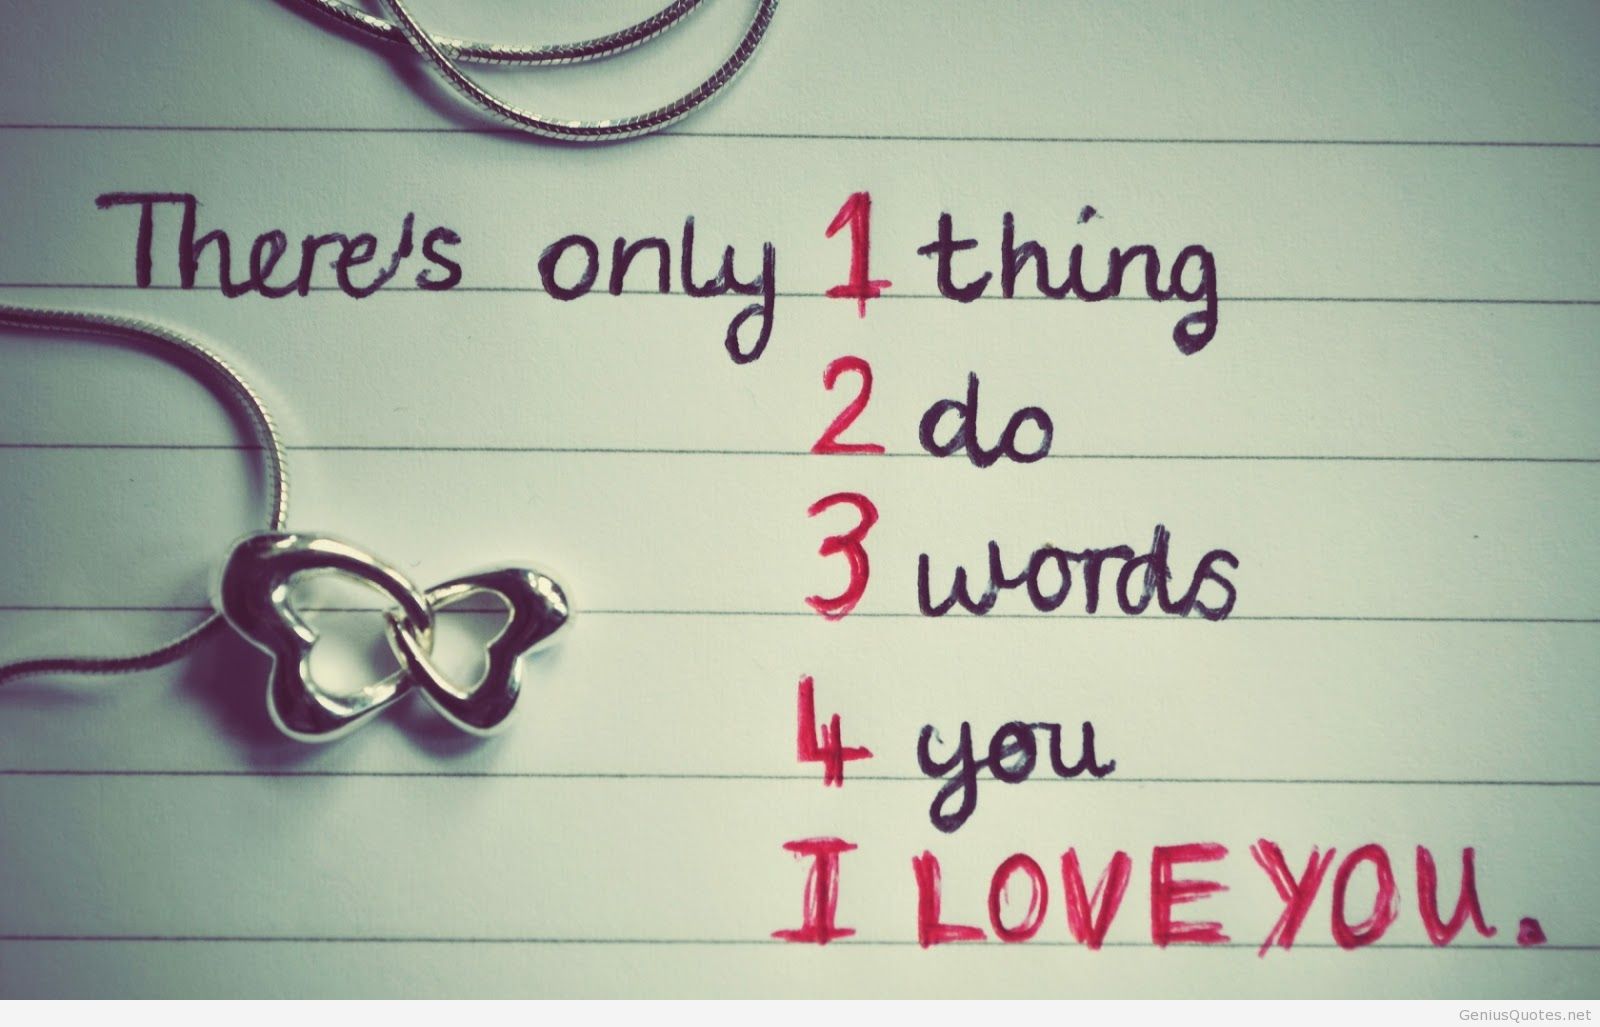 i love you quote images